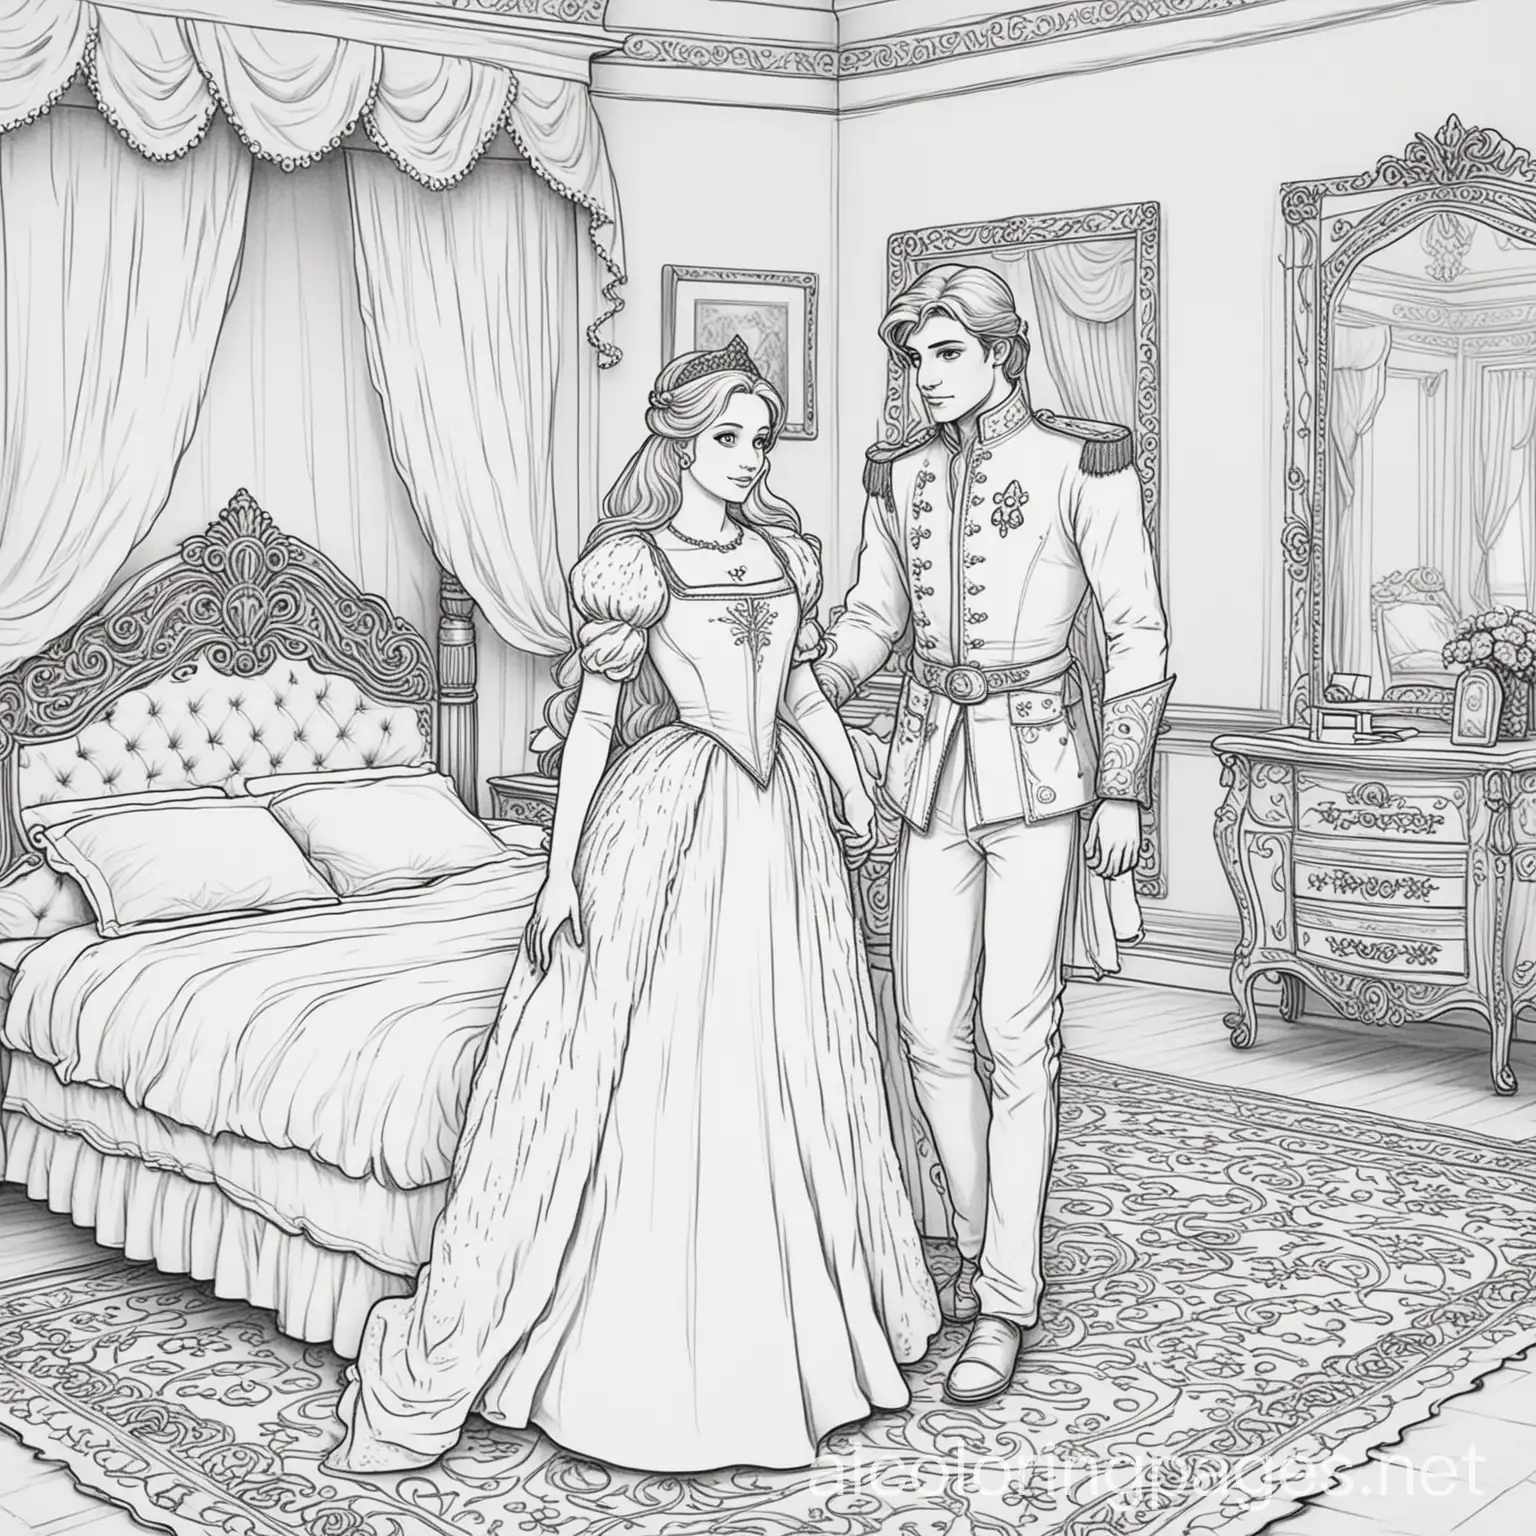 young prince standing across a princess in the princess's bed room

, Coloring Page, black and white, line art, white background, Simplicity, Ample White Space. The background of the coloring page is plain white to make it easy for young children to color within the lines. The outlines of all the subjects are easy to distinguish, making it simple for kids to color without too much difficulty